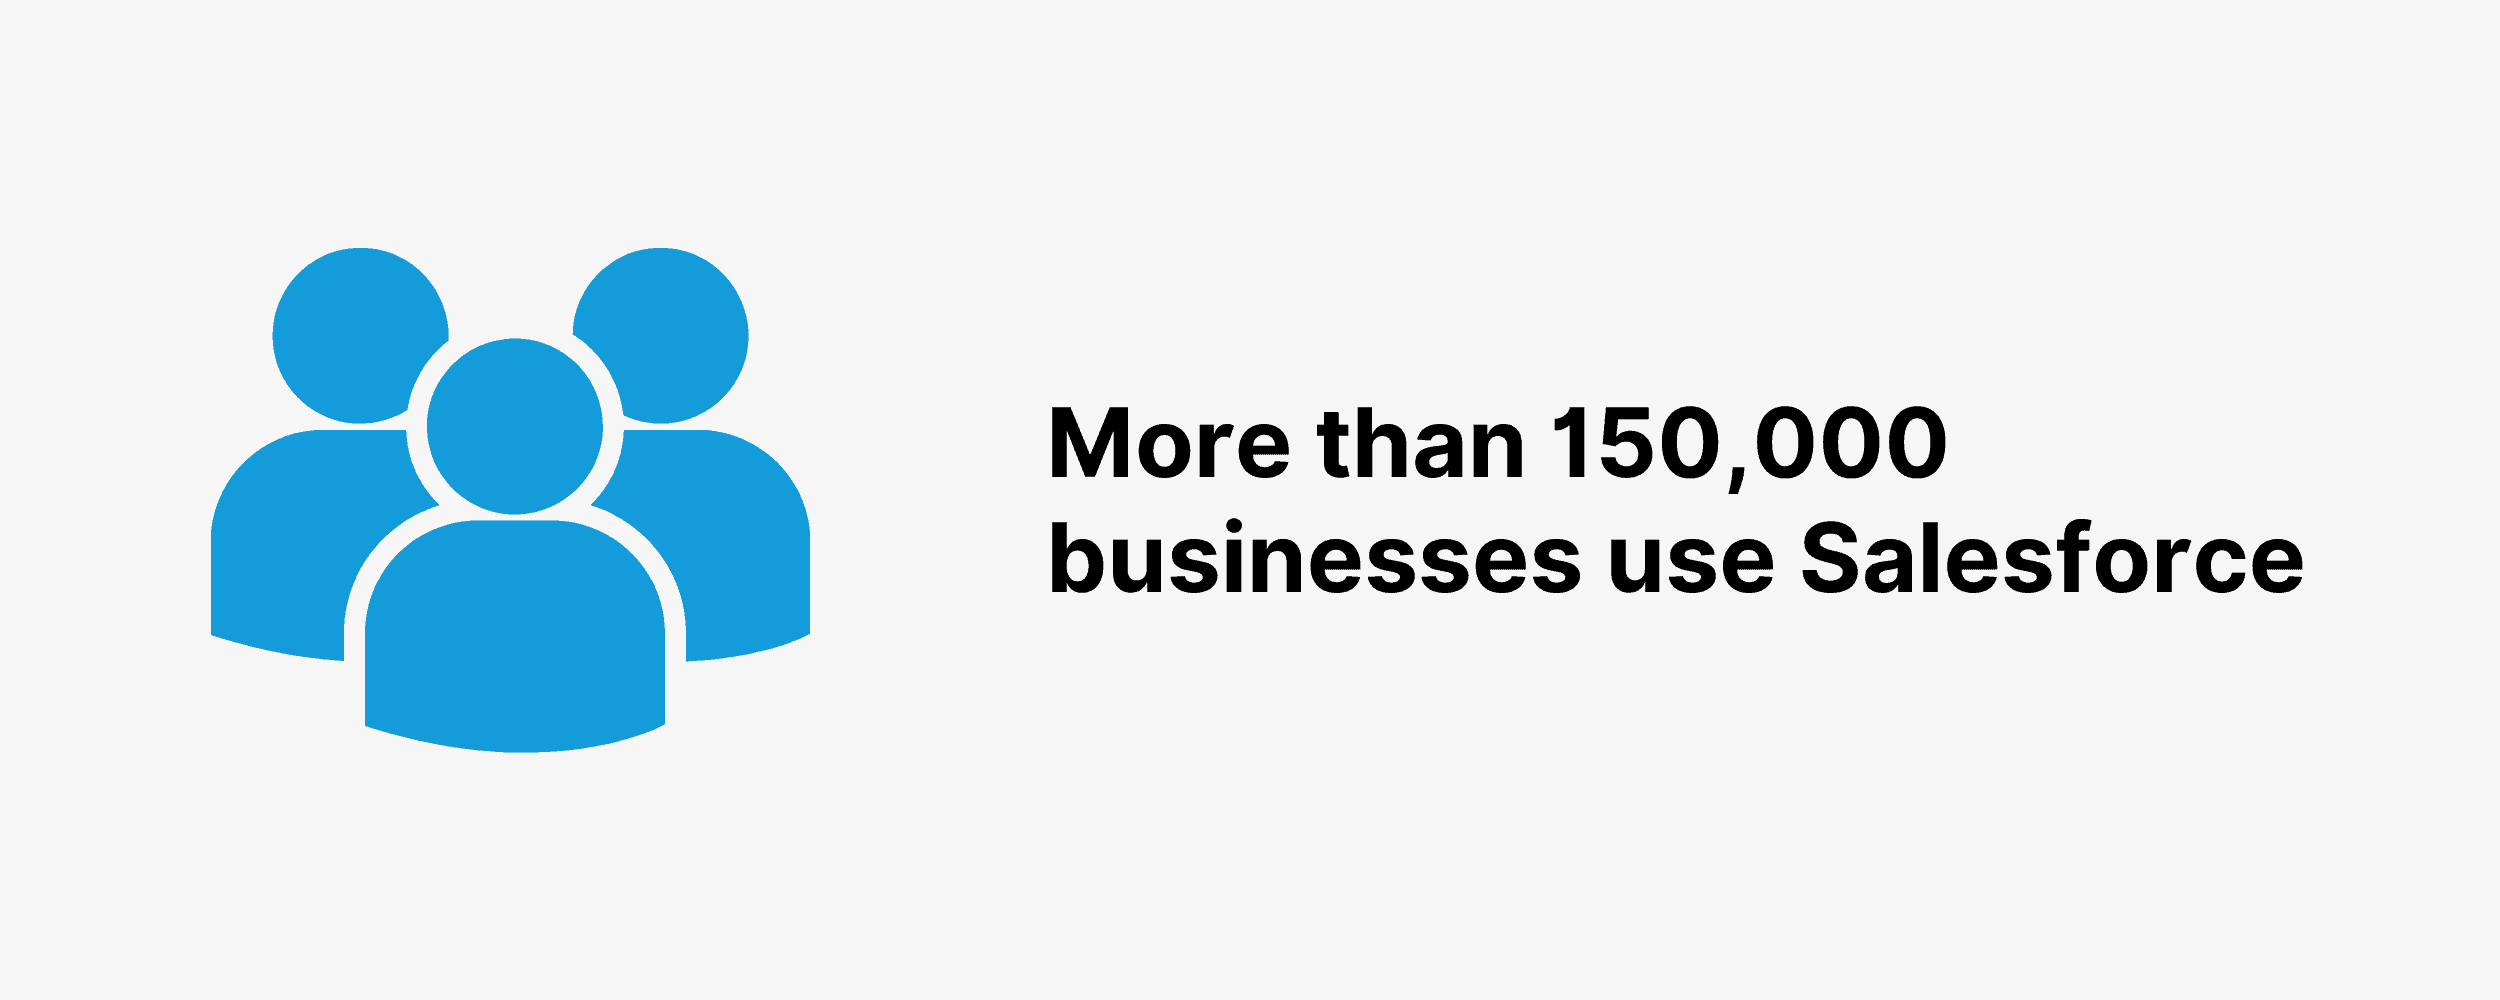 More than 150,000 businesses use Salesforce